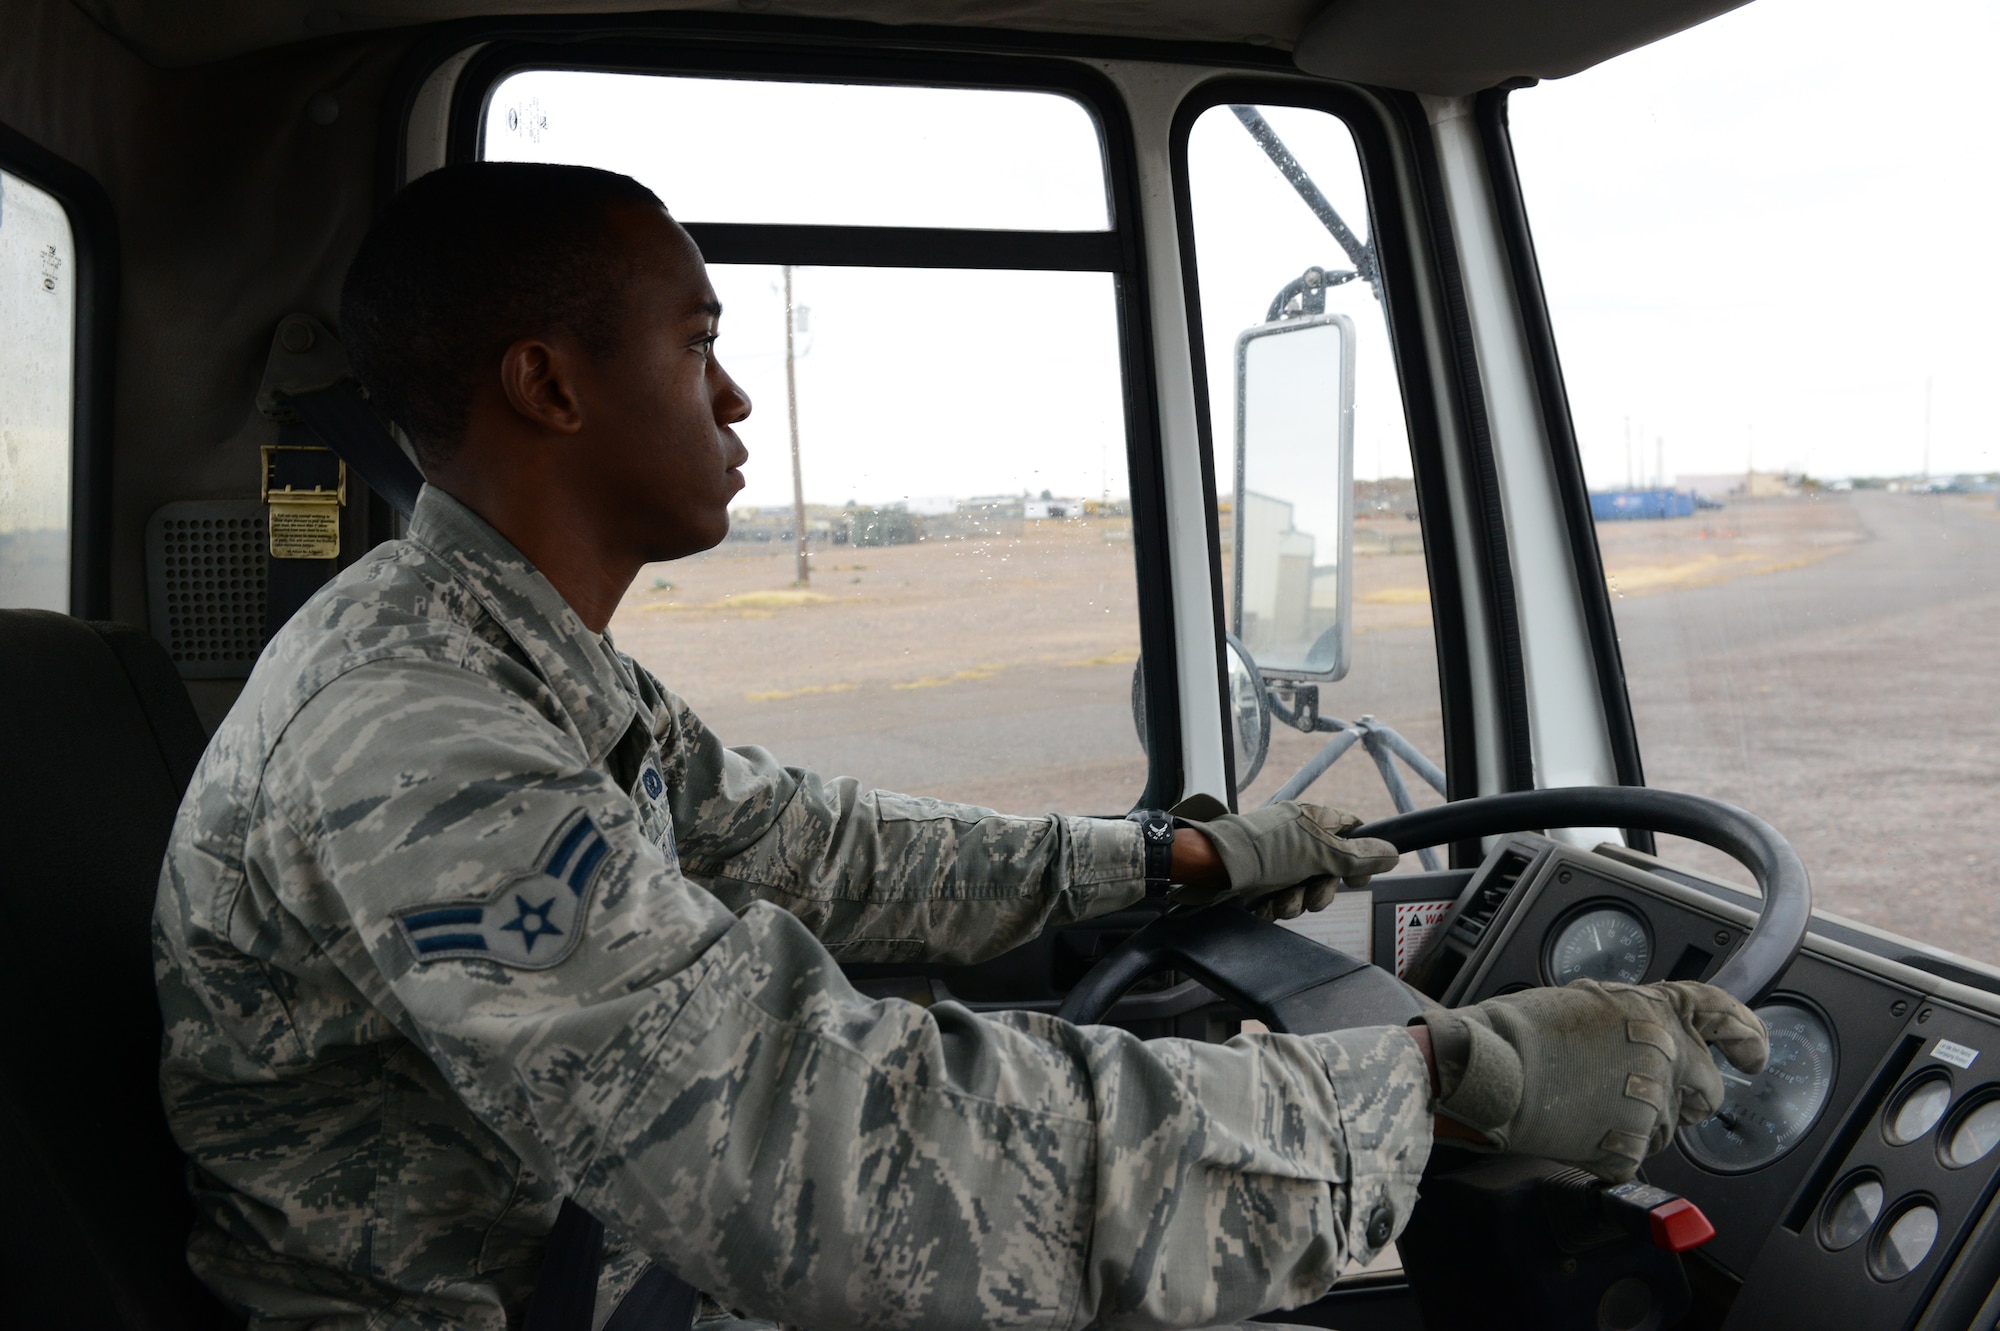 Airman 1st Class Demetrius Smith, 56th Civil Engineer Squadron heavy equipment operator, drives a street sweeper along perimeter road at Luke Air Force Base, Ariz., Jan. 5, 2015. Street sweeping, heavy equipment movement and excavators for trenches are utilized to assist various jobs around the base and 56th CES. (U.S. Air Force photo by Senior Airman James Hensley)